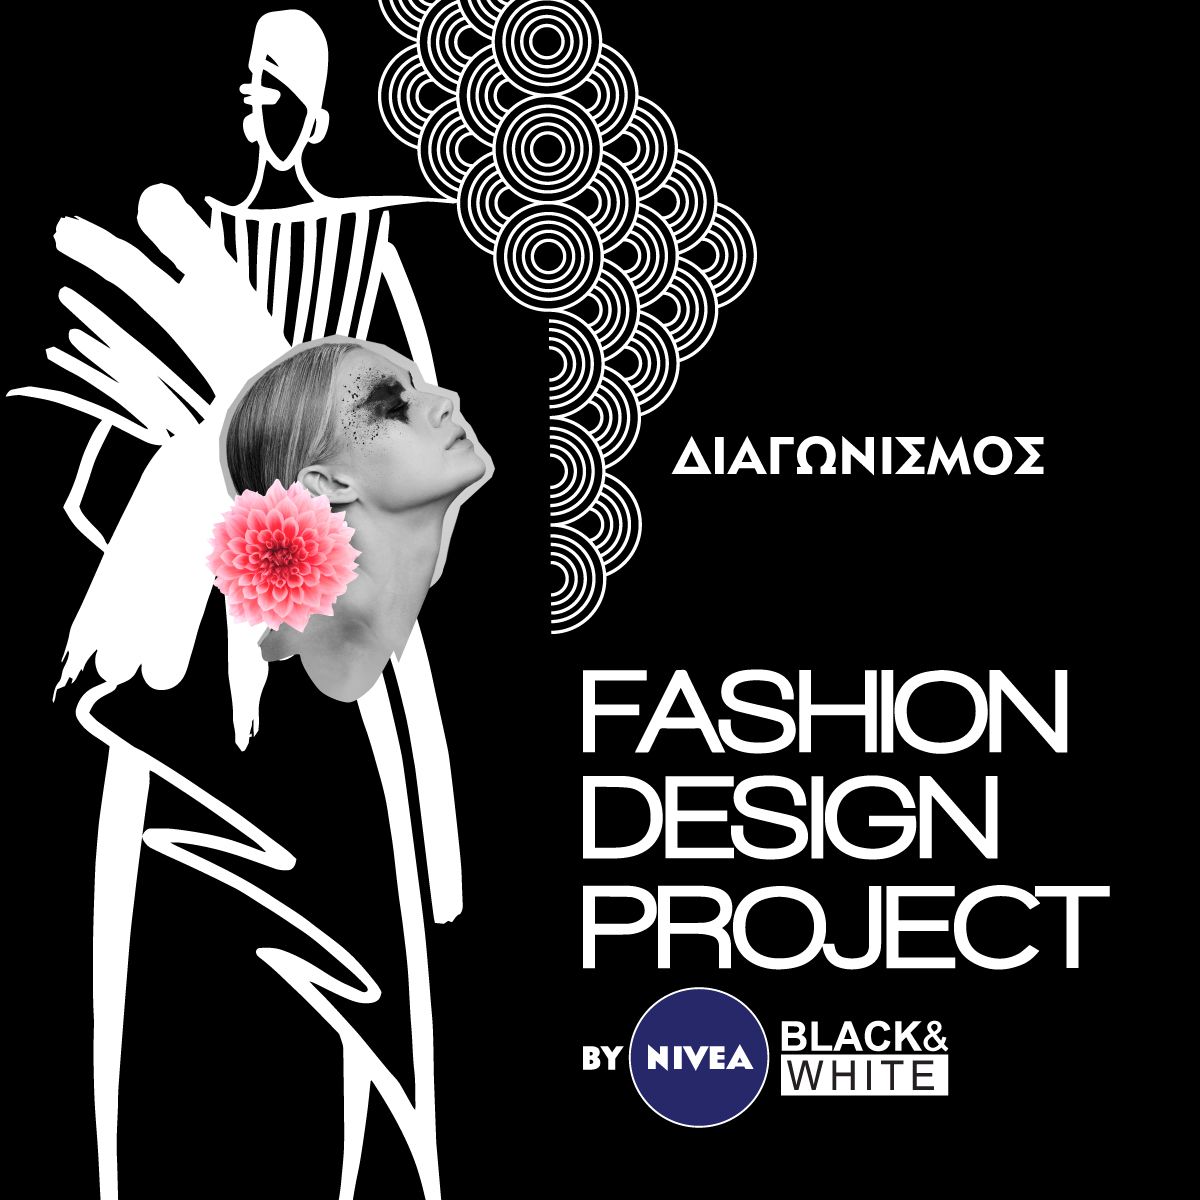 images easyblog articles 11743 Fashion Design Project by NIVEA Black and White key visual c360f89d